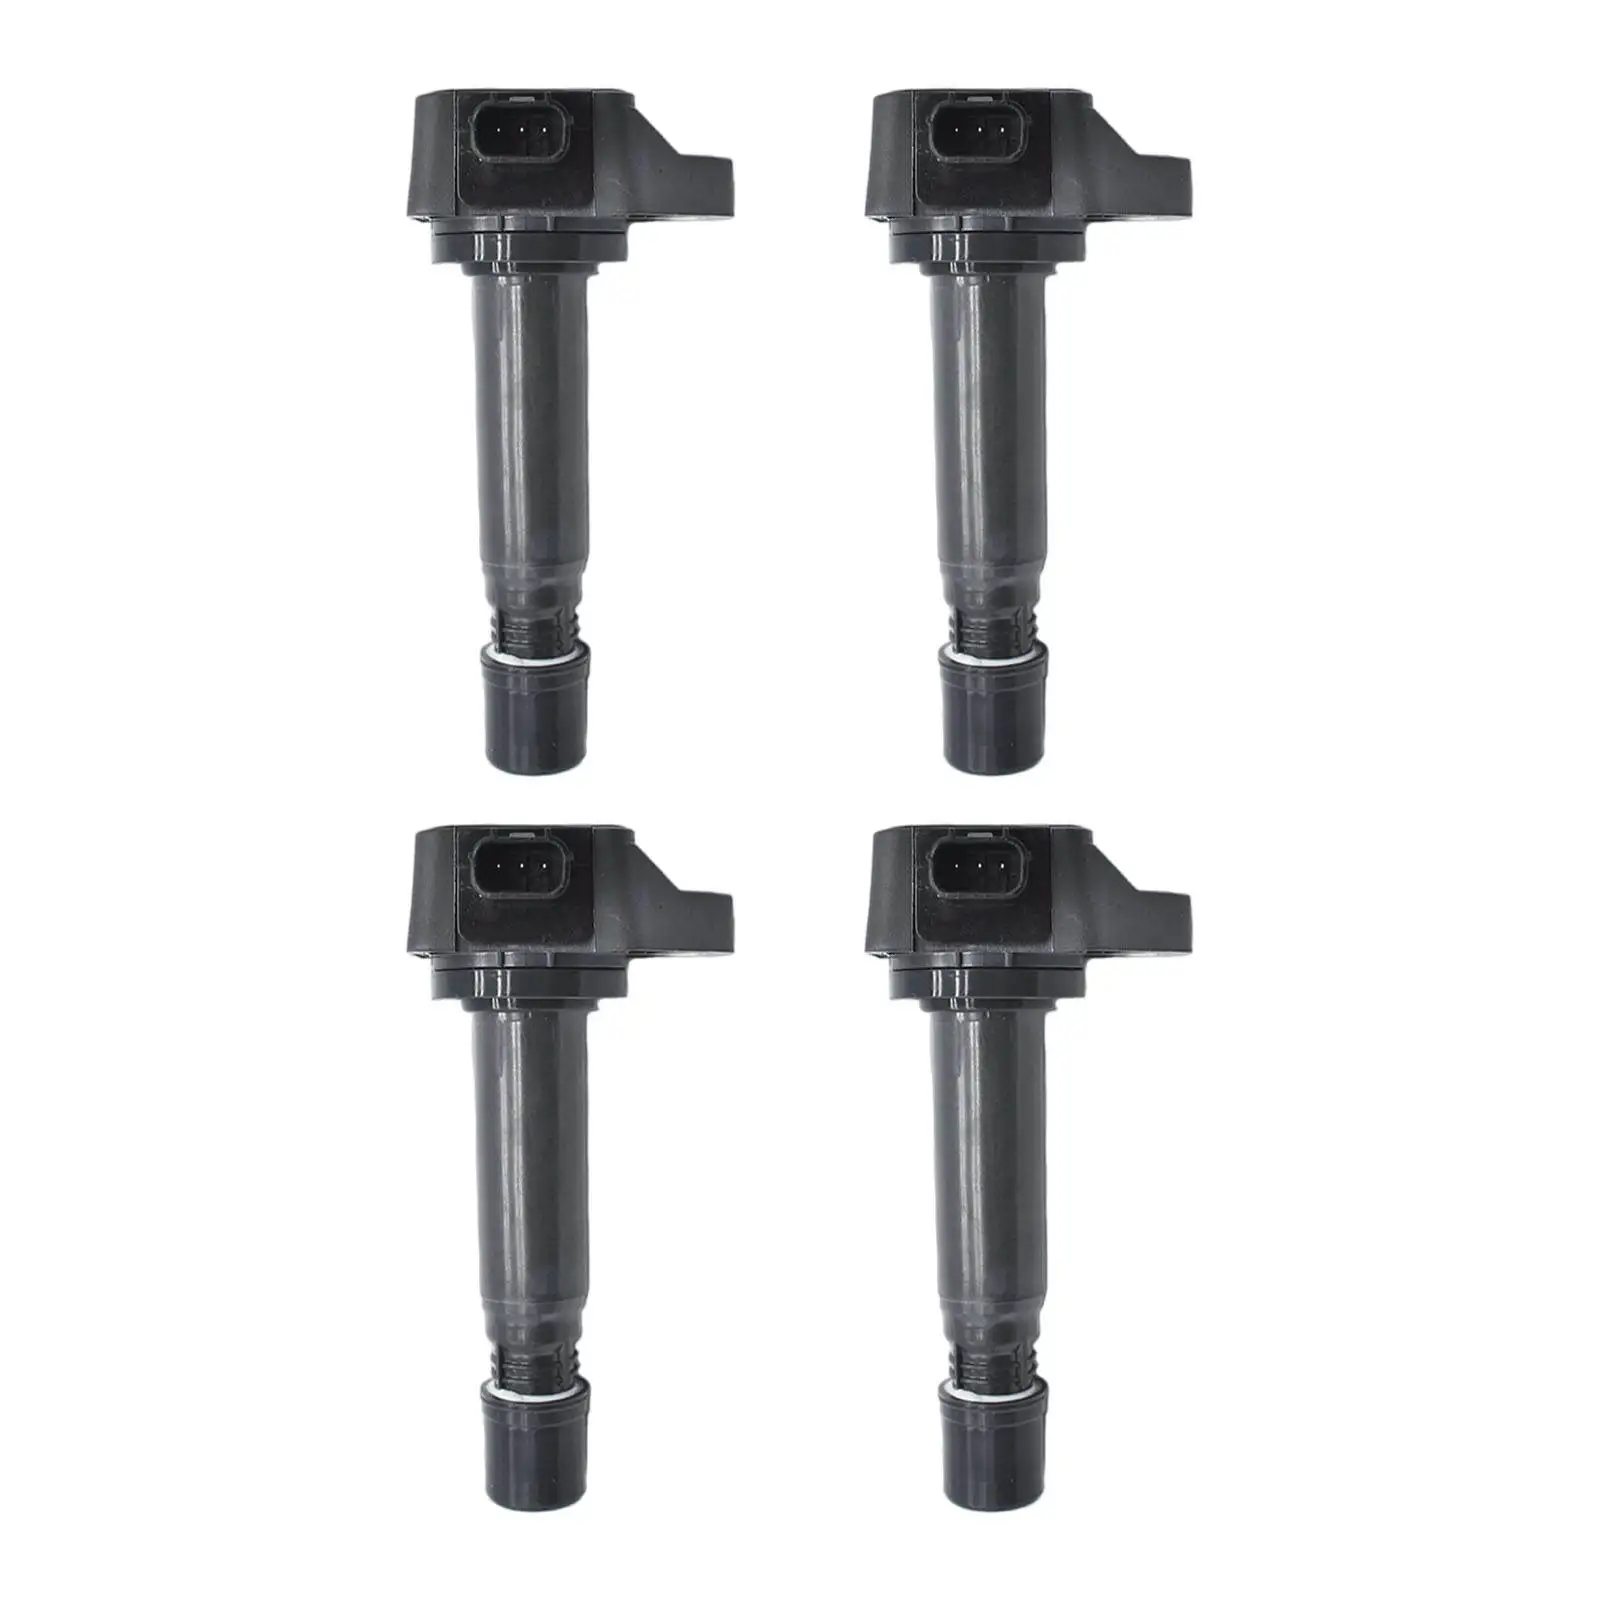 4Pcs Ignition Coil High Performance Hardware Plastic Vehicle Parts Car Supplies Replacement Fit for Honda 2.0L 2007-2011